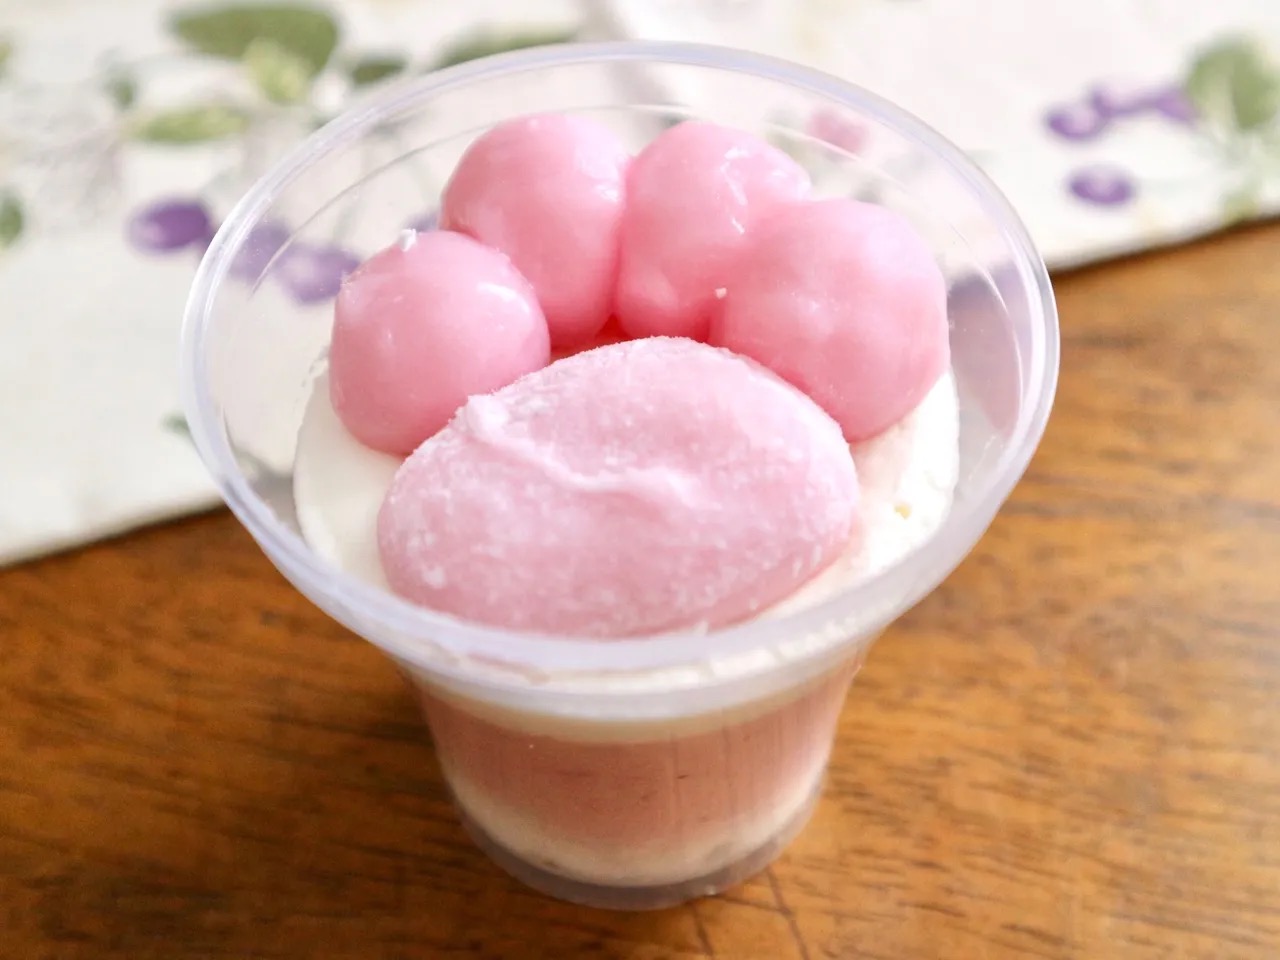 7-Eleven’s edible cat paw proves Japanese convenience store sweets
are on a whole other level